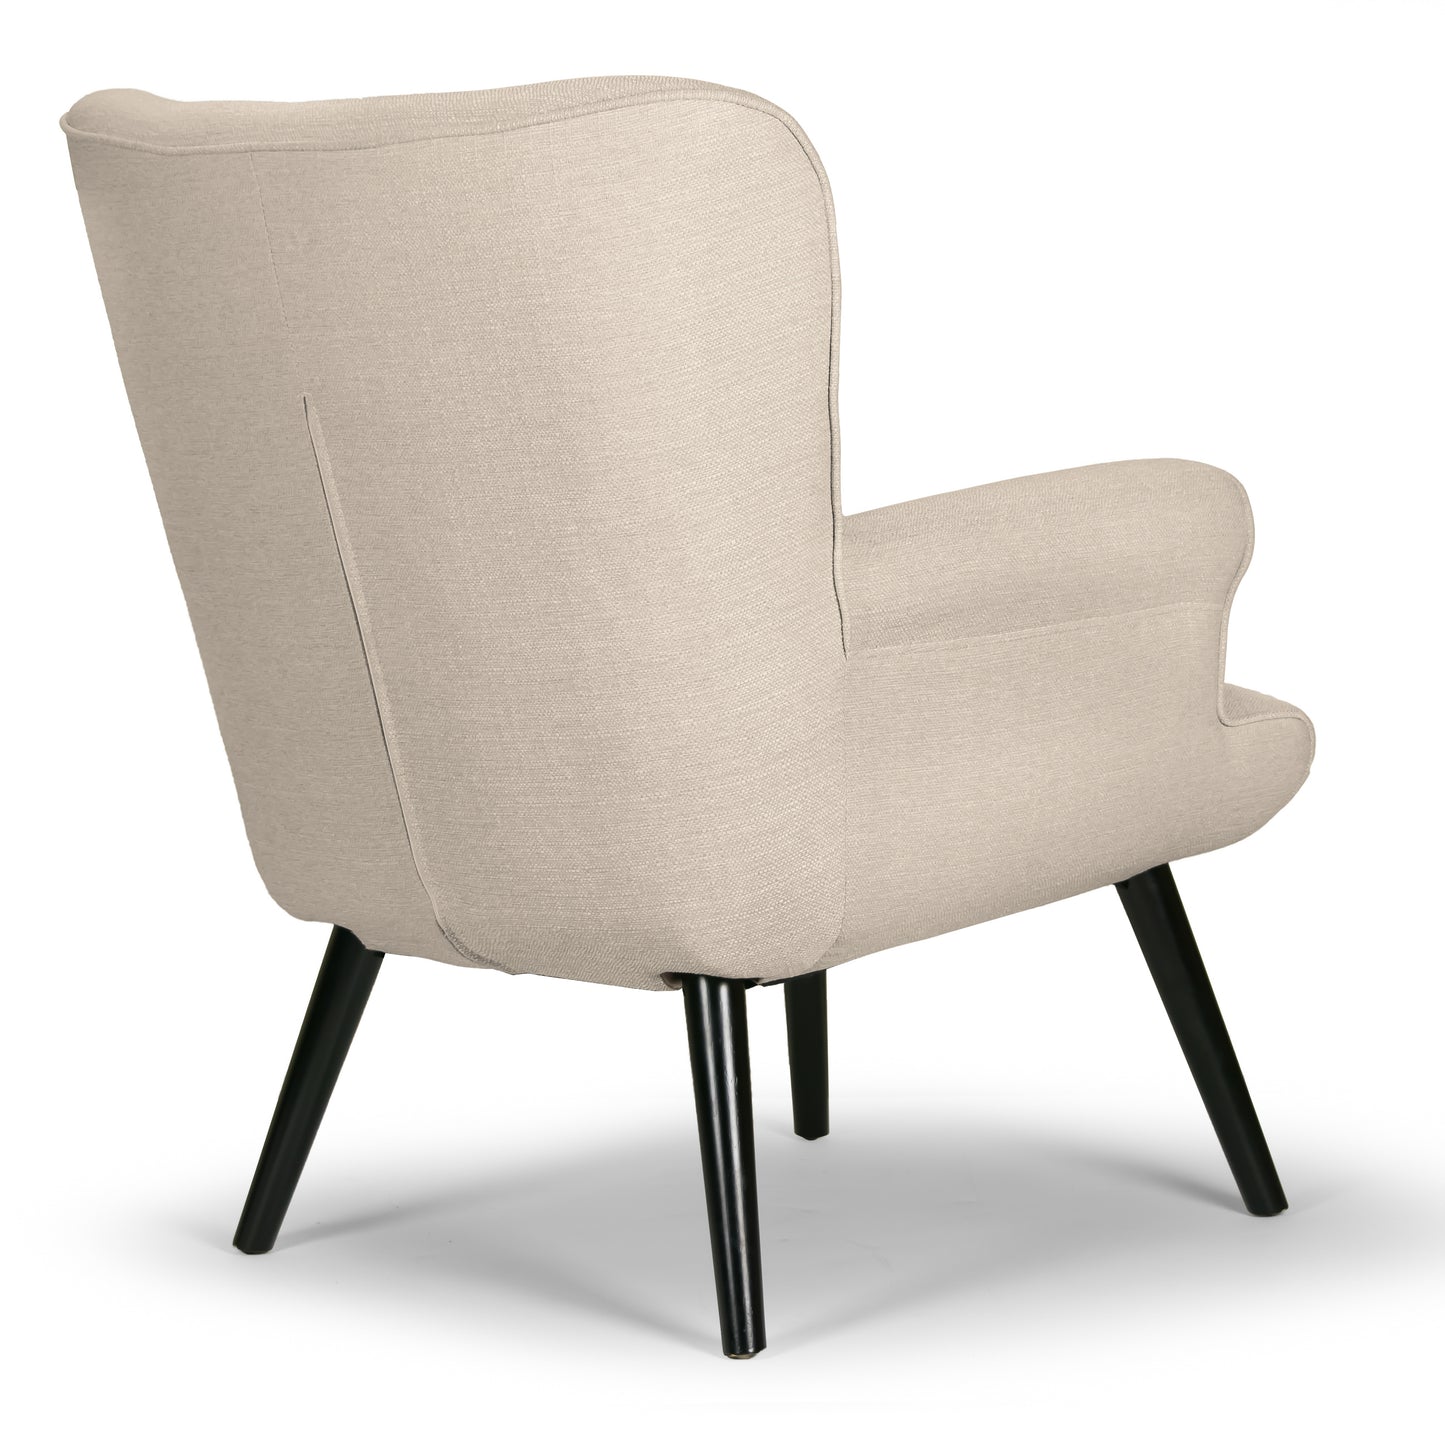 Alexi Modern Beige Fabric Wing Chair with Button Tufted Back